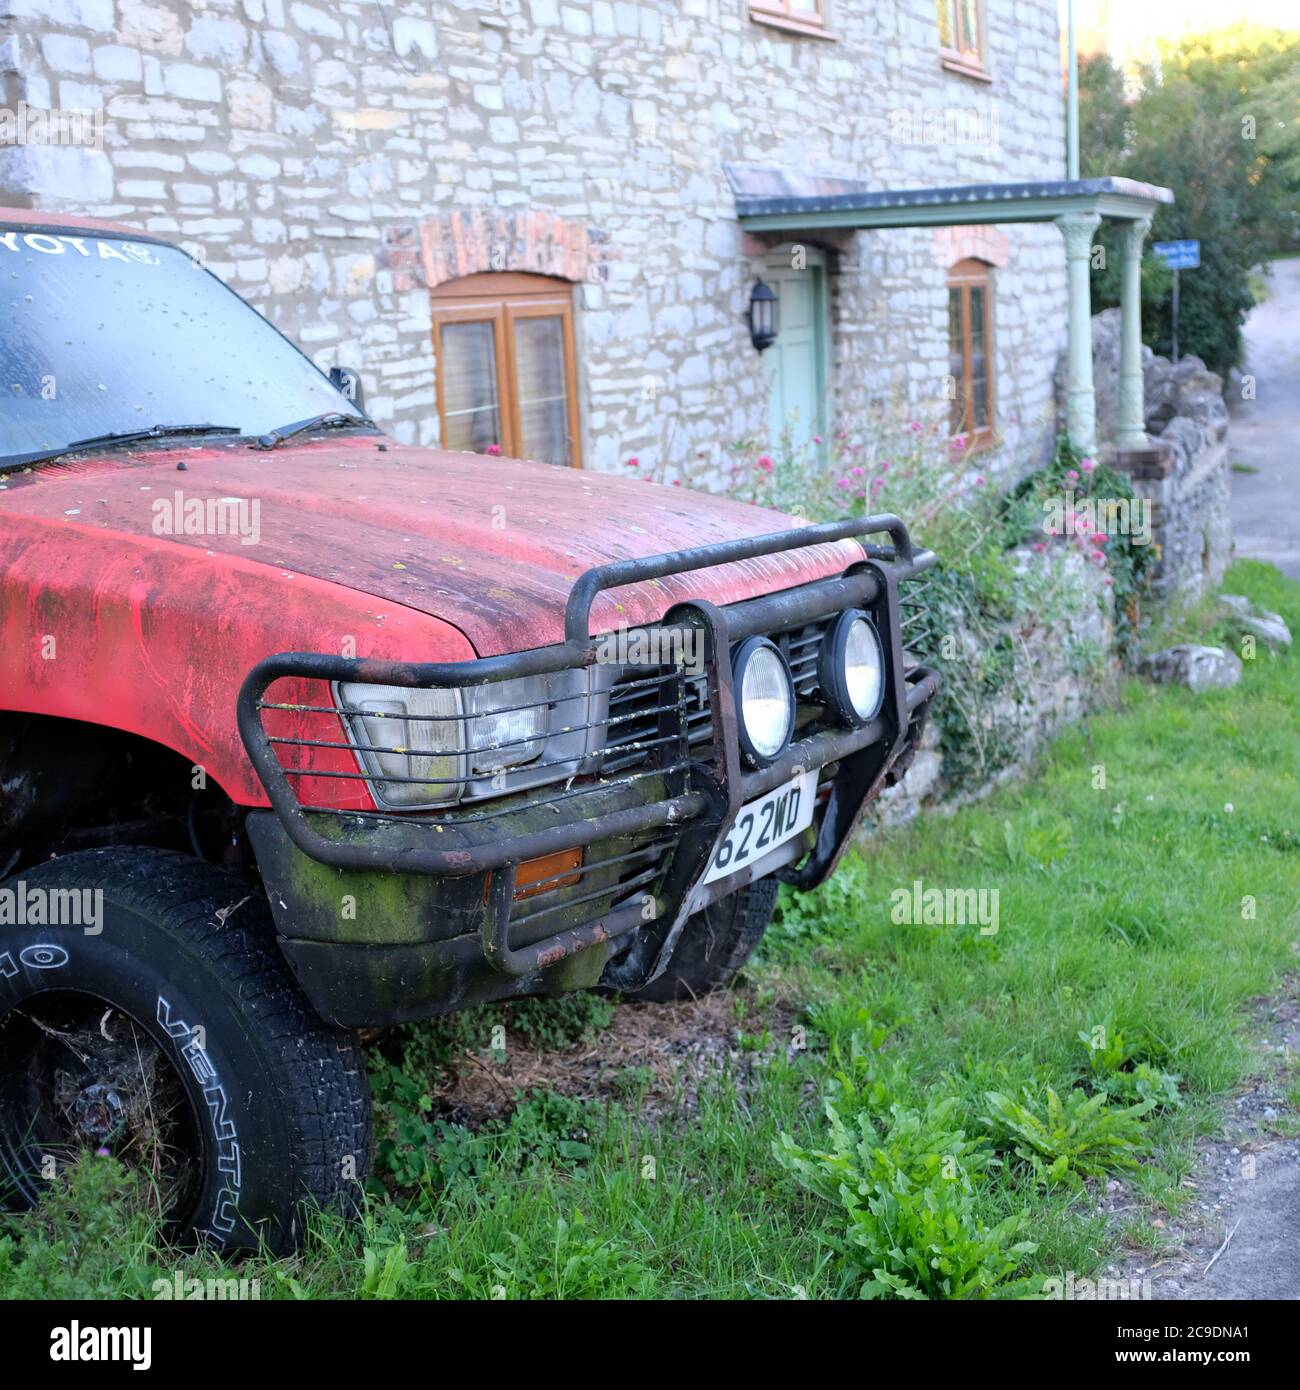 July 2020 - Old red Toyota pickup truck rotting away unloved. Stock Photo